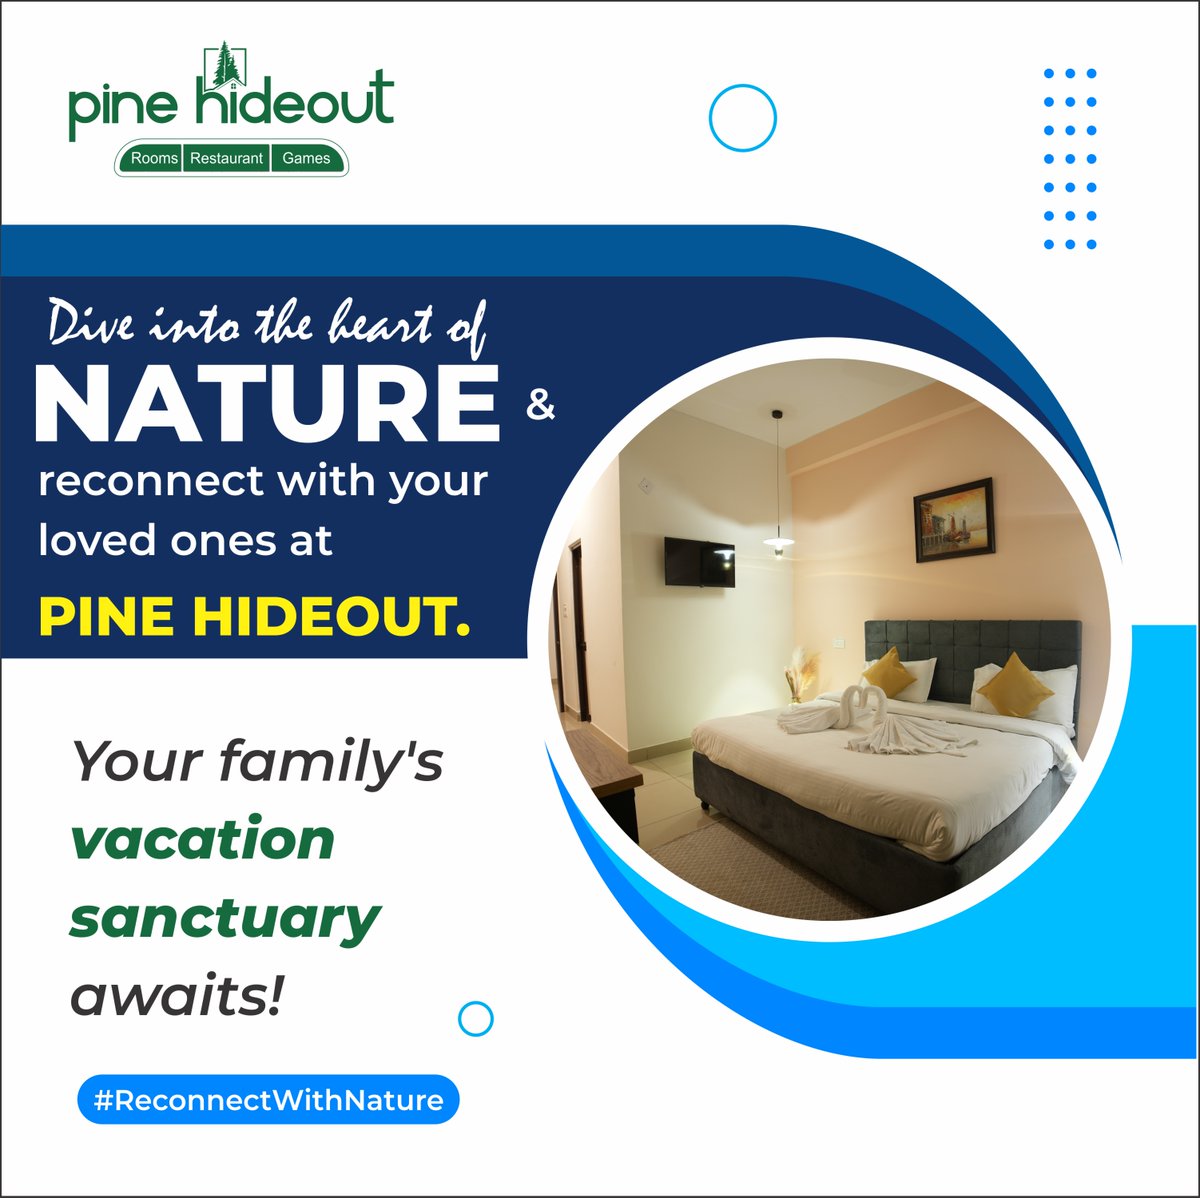 Dive into the heart of nature and reconnect with your loved ones at Pine Hideout. Your family's vacation sanctuary awaits! 

#ReconnectWithNature #FamilyRetreat #NatureEscape  #heartofnature #loved  #loved  #vacation #sanctuary #jammu #kashmir #kathua #billawar #sukralamata